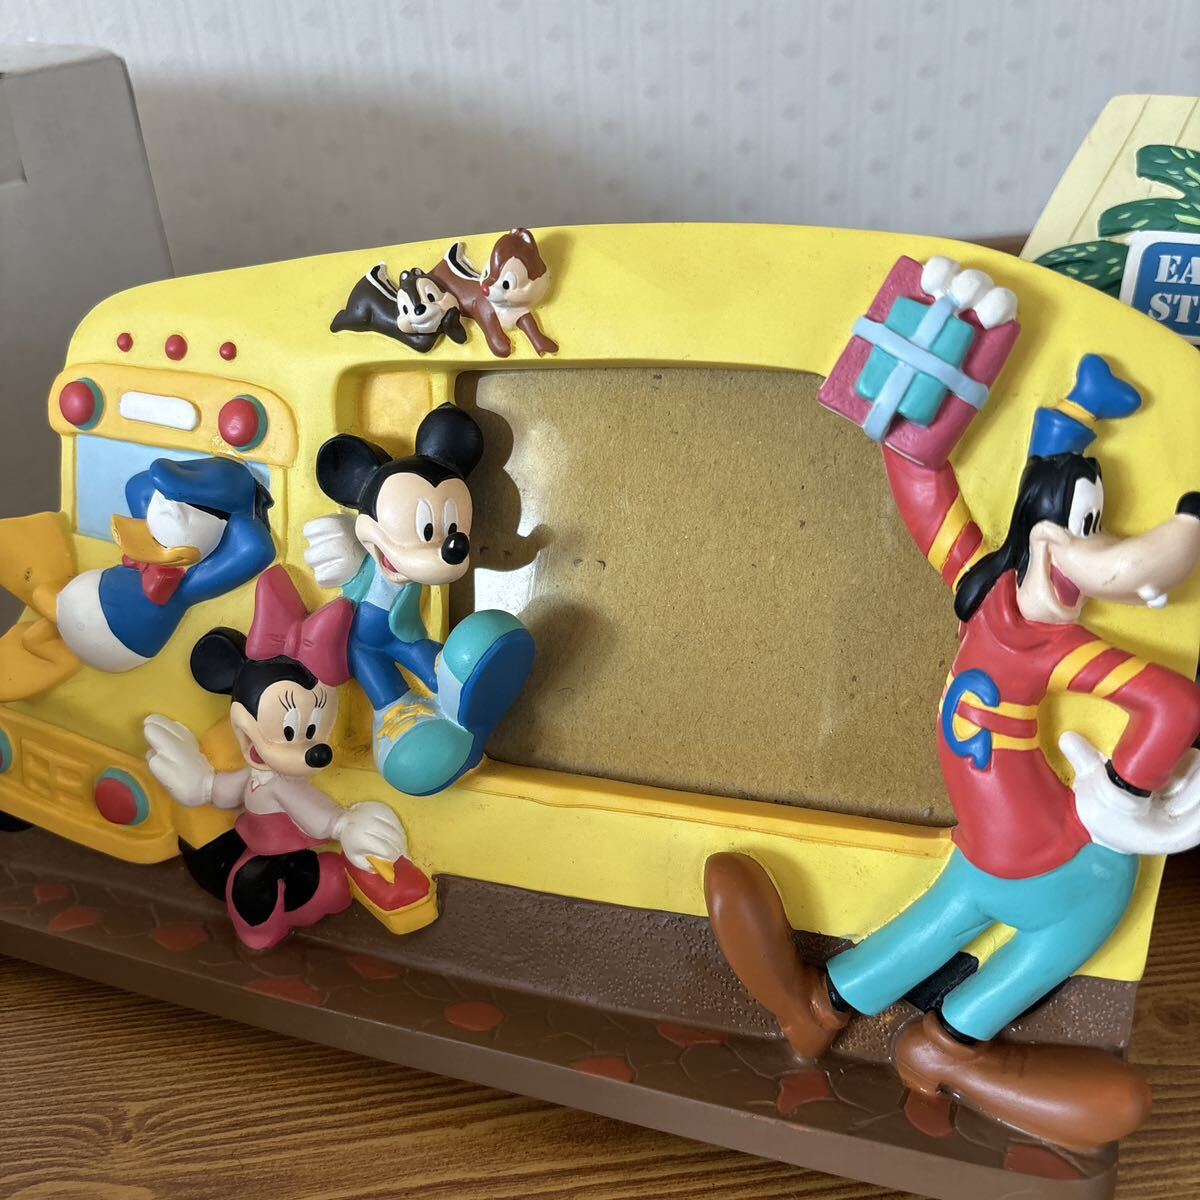  Disney Toy Story Stitch Mickey chip . Dale photograph length memory stand ceramics ornament that time thing figure 